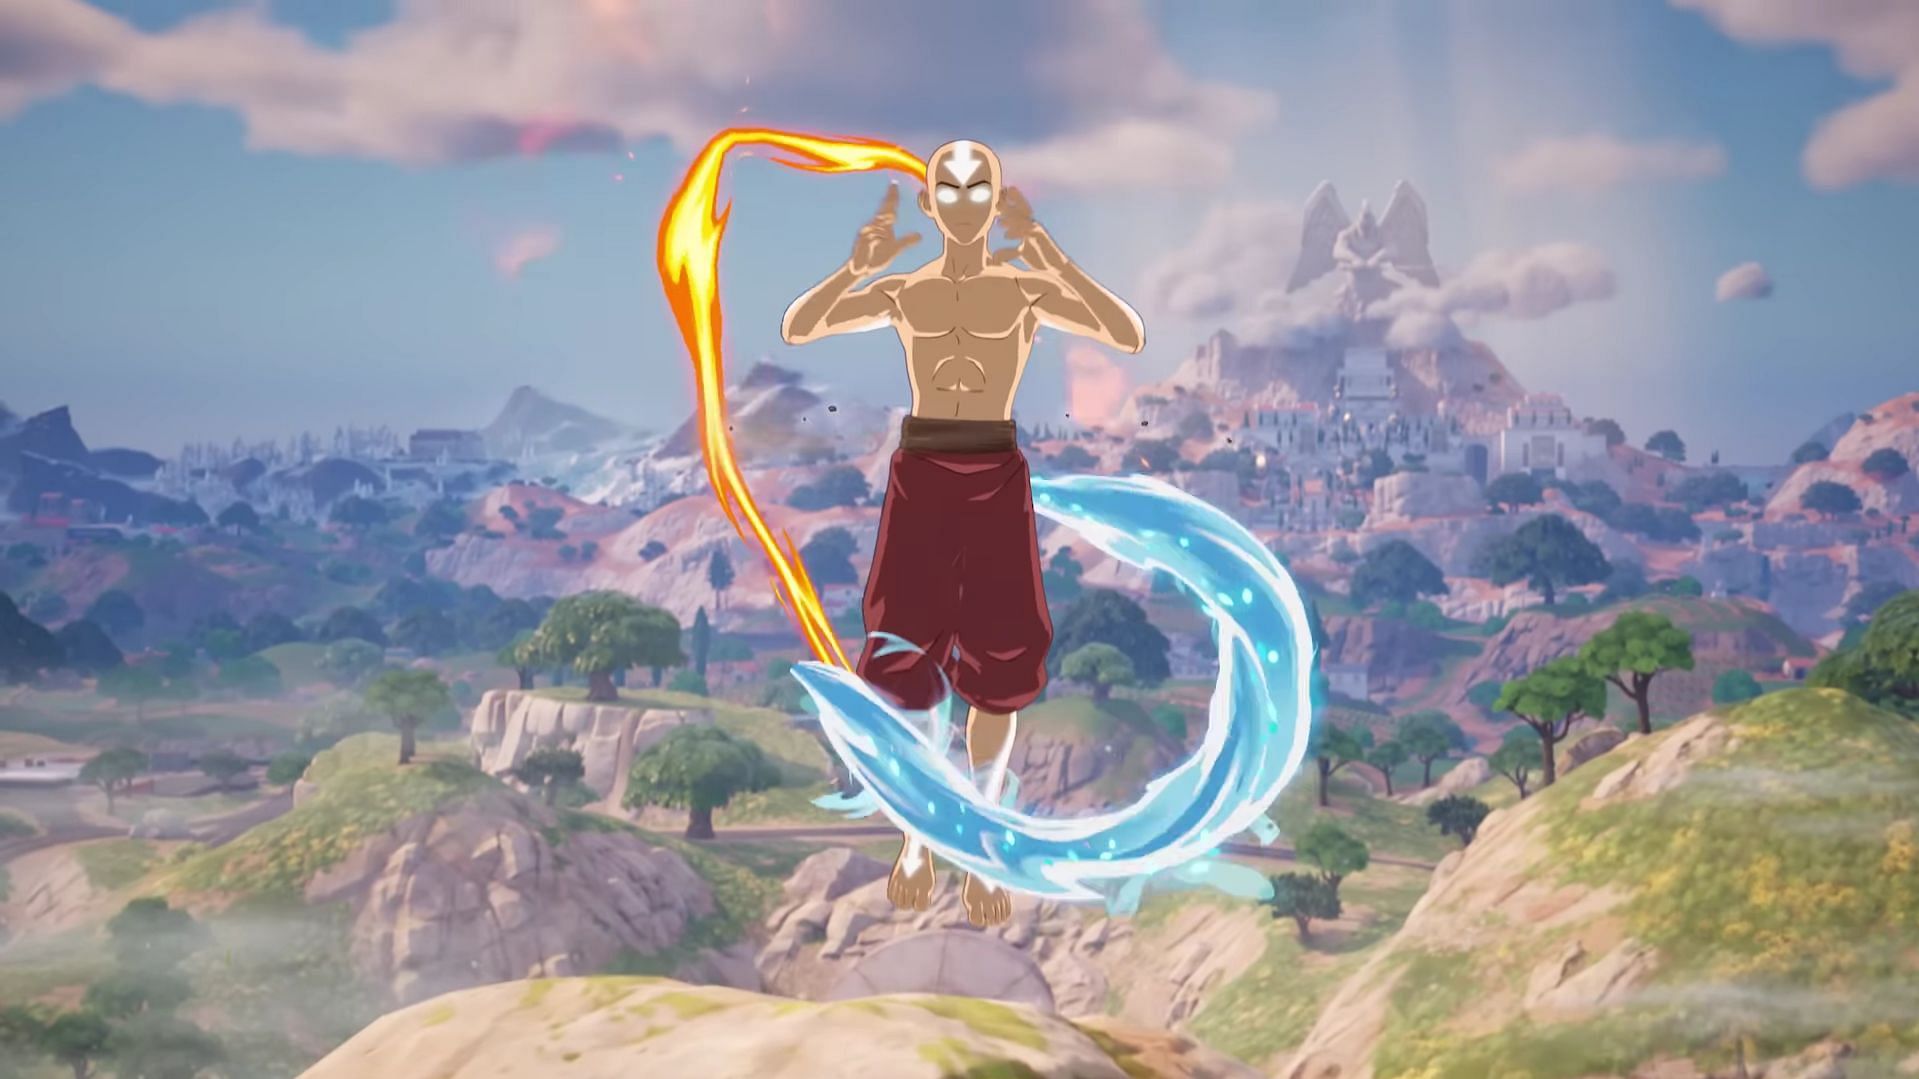 Aang using all the Elements. (Image via Fortnite/YouTube)